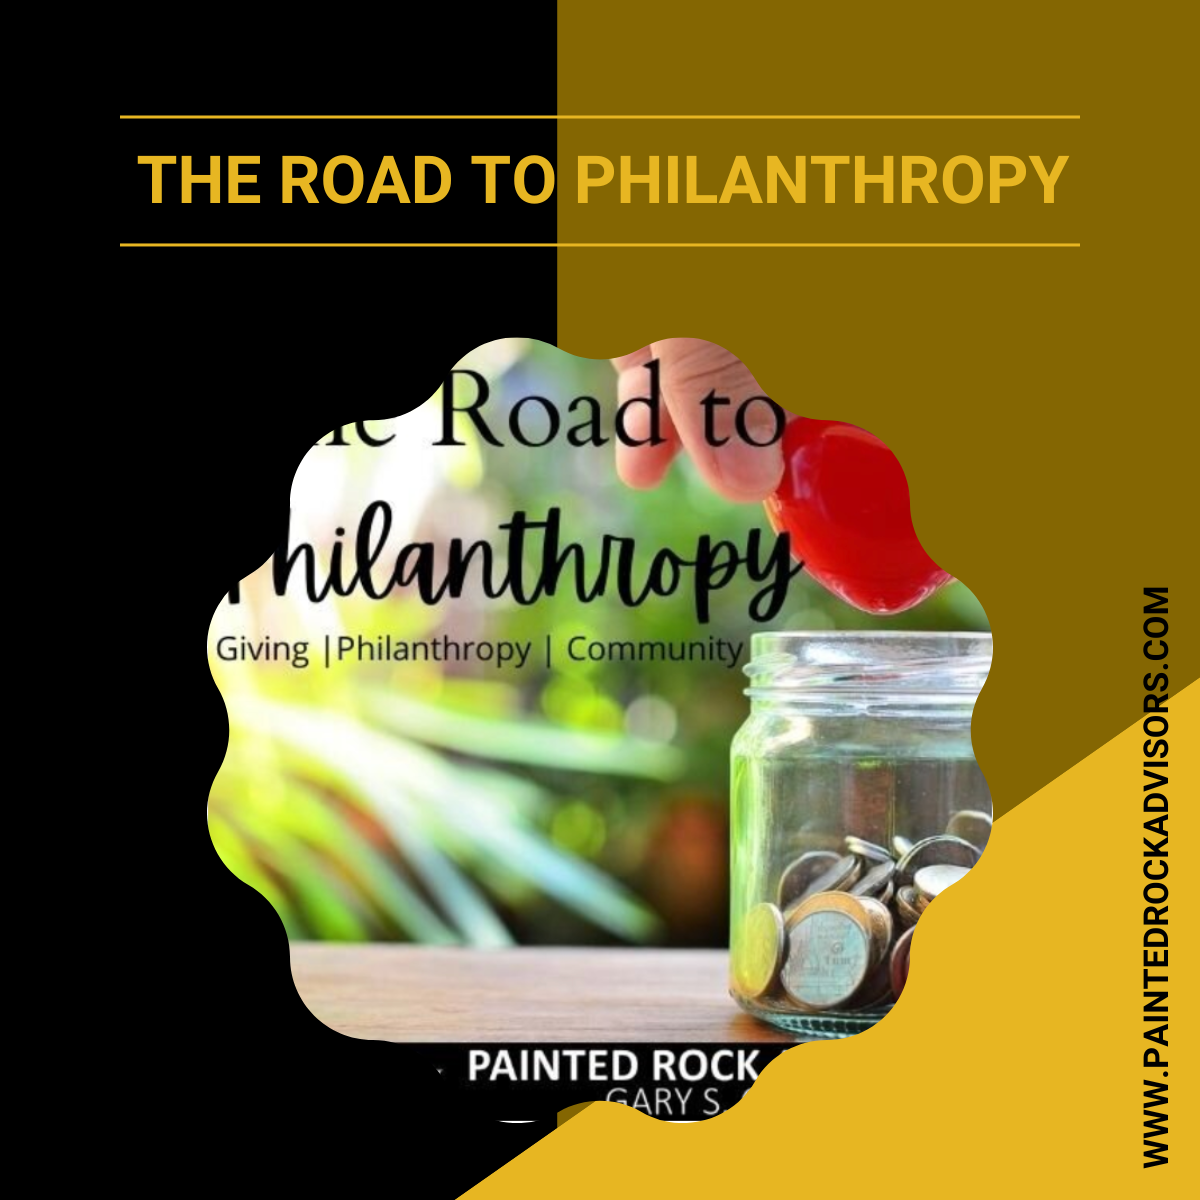 The Road to Philanthropy